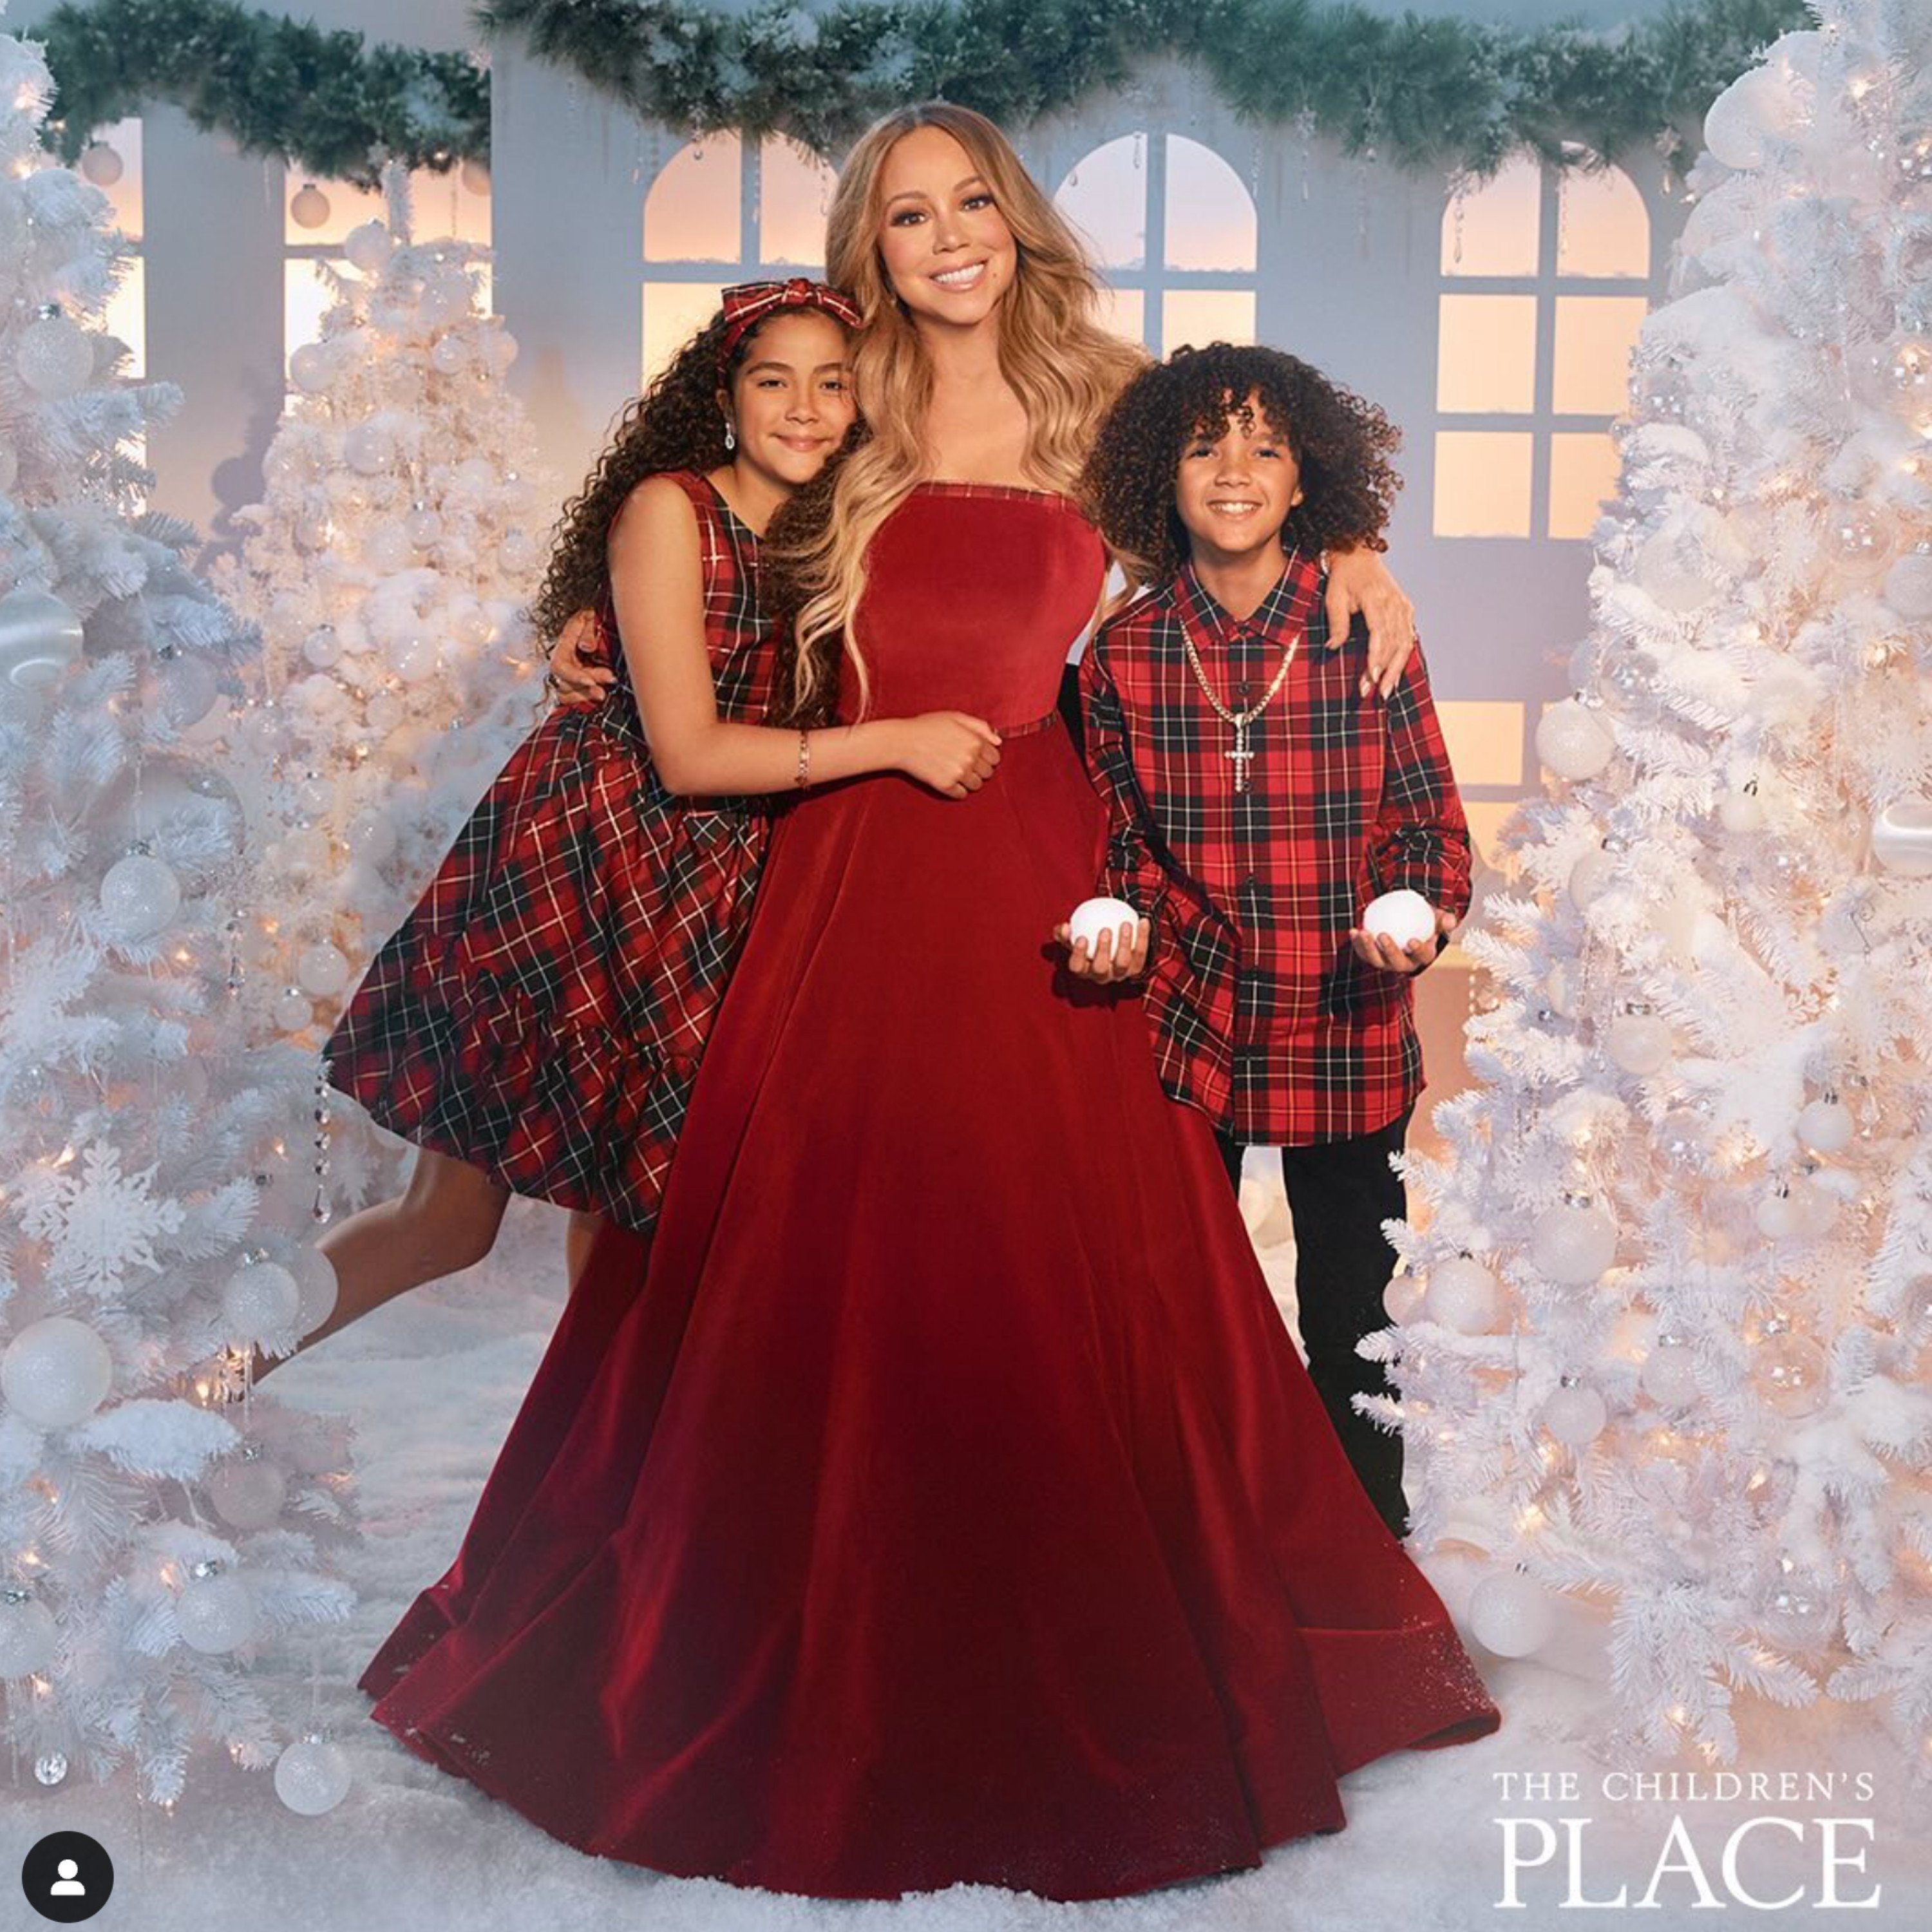 Singer Mariah Carey’s twins, Monroe and Moroccan, are growing up fast. Photo: @mariahcarey/Instagram